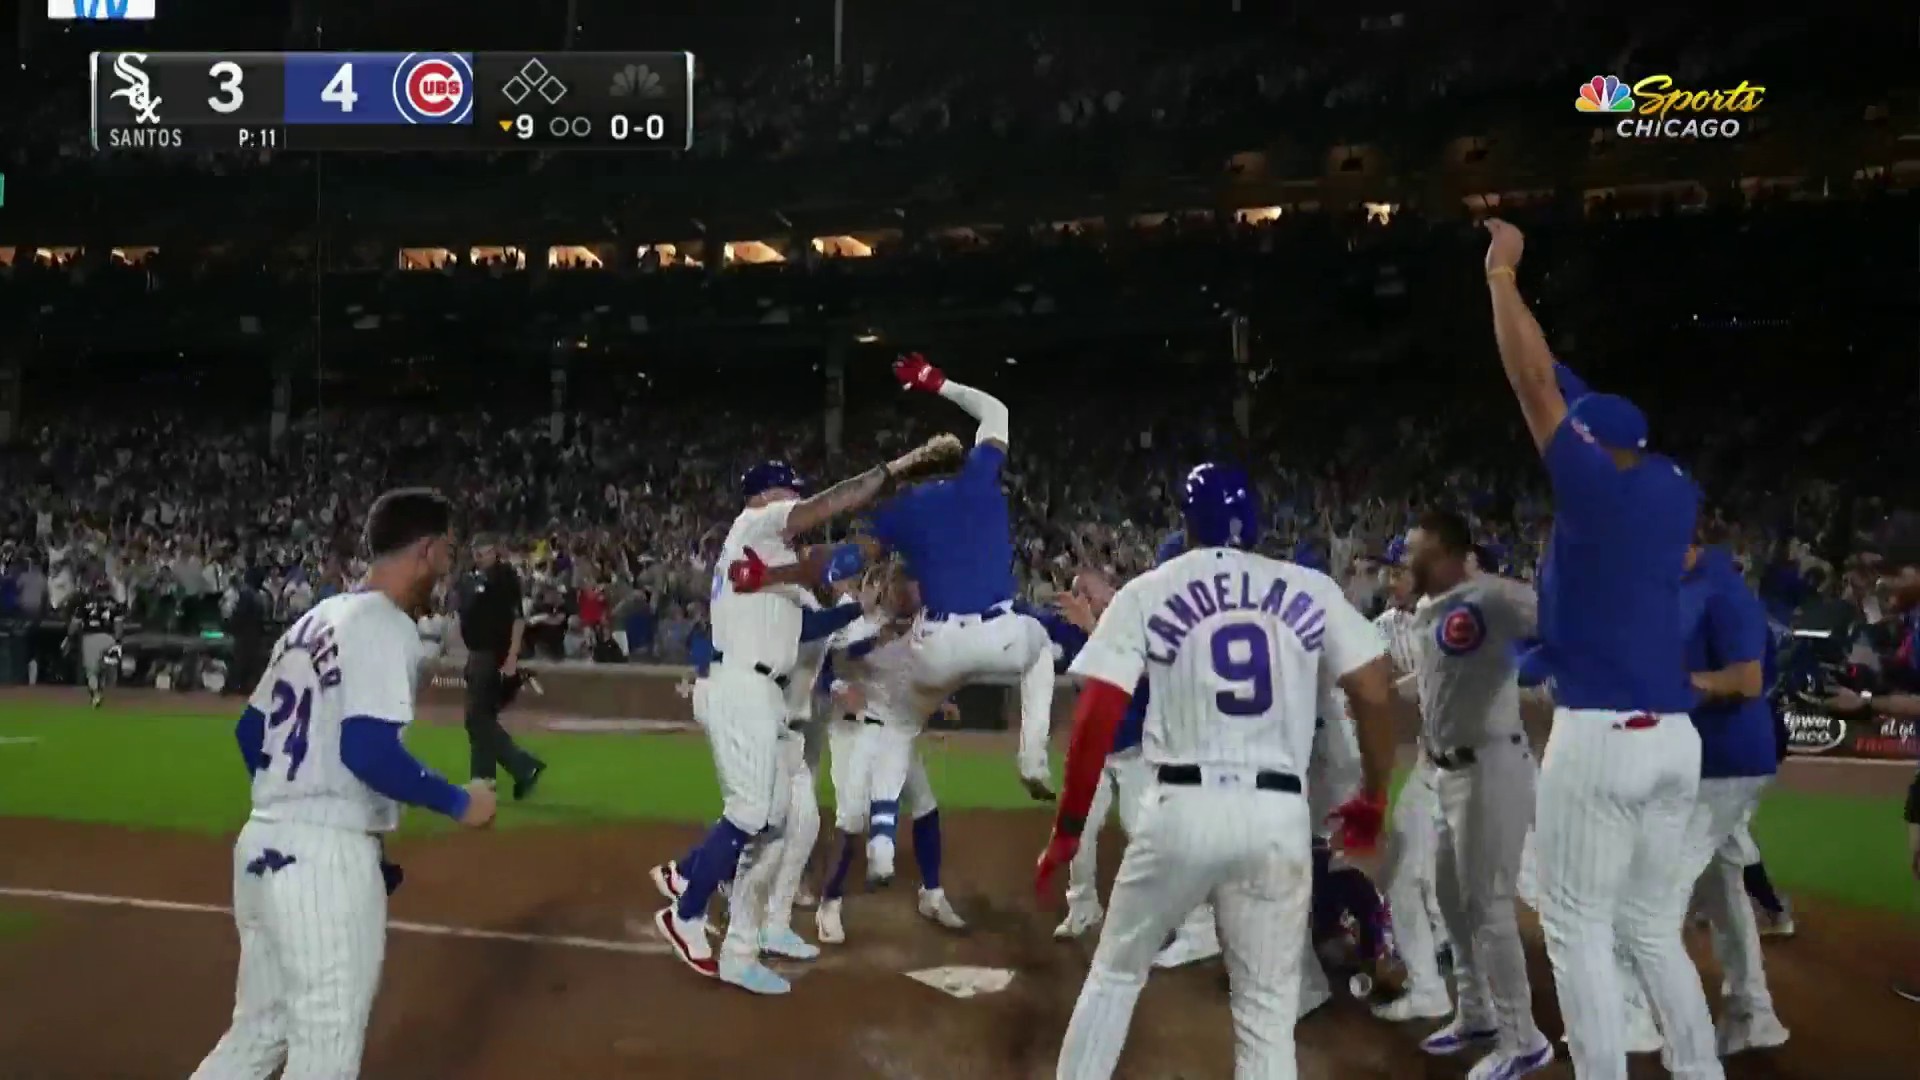 WATCH Christopher Morel hits walk-off home run, Cubs take down White Sox 4-3